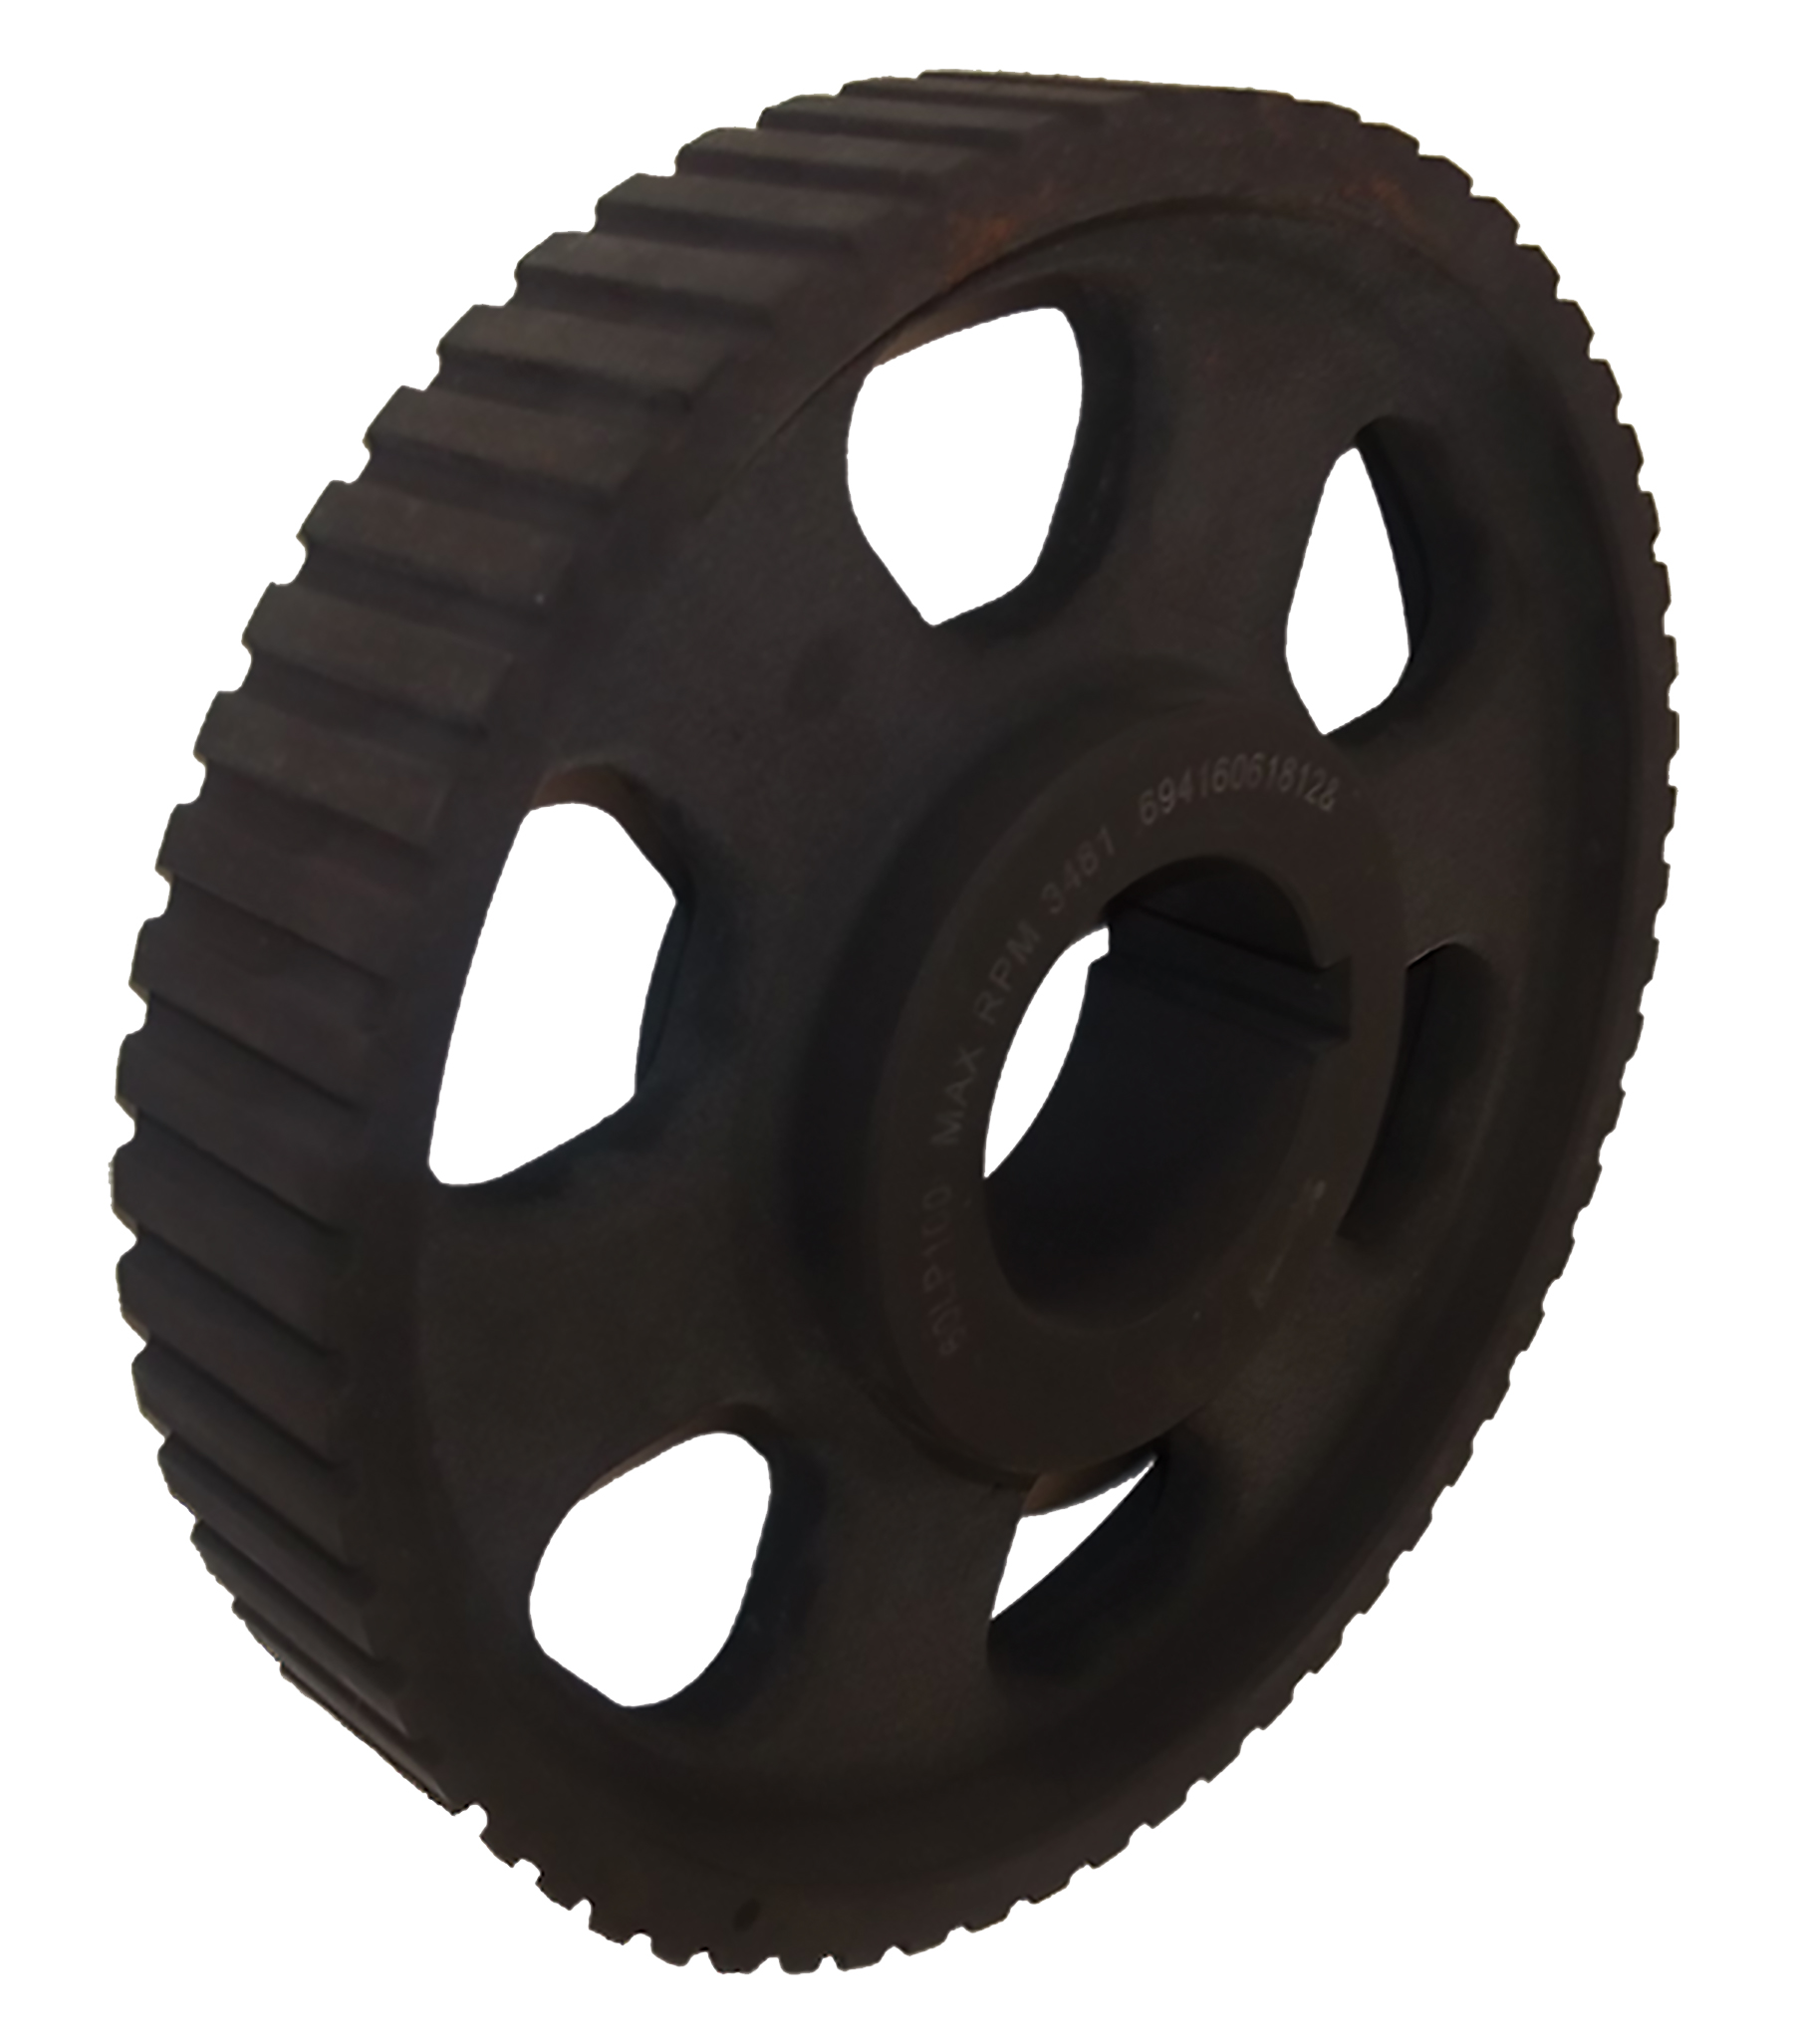 96LP100 - Cast Iron Imperial Pitch Pulleys